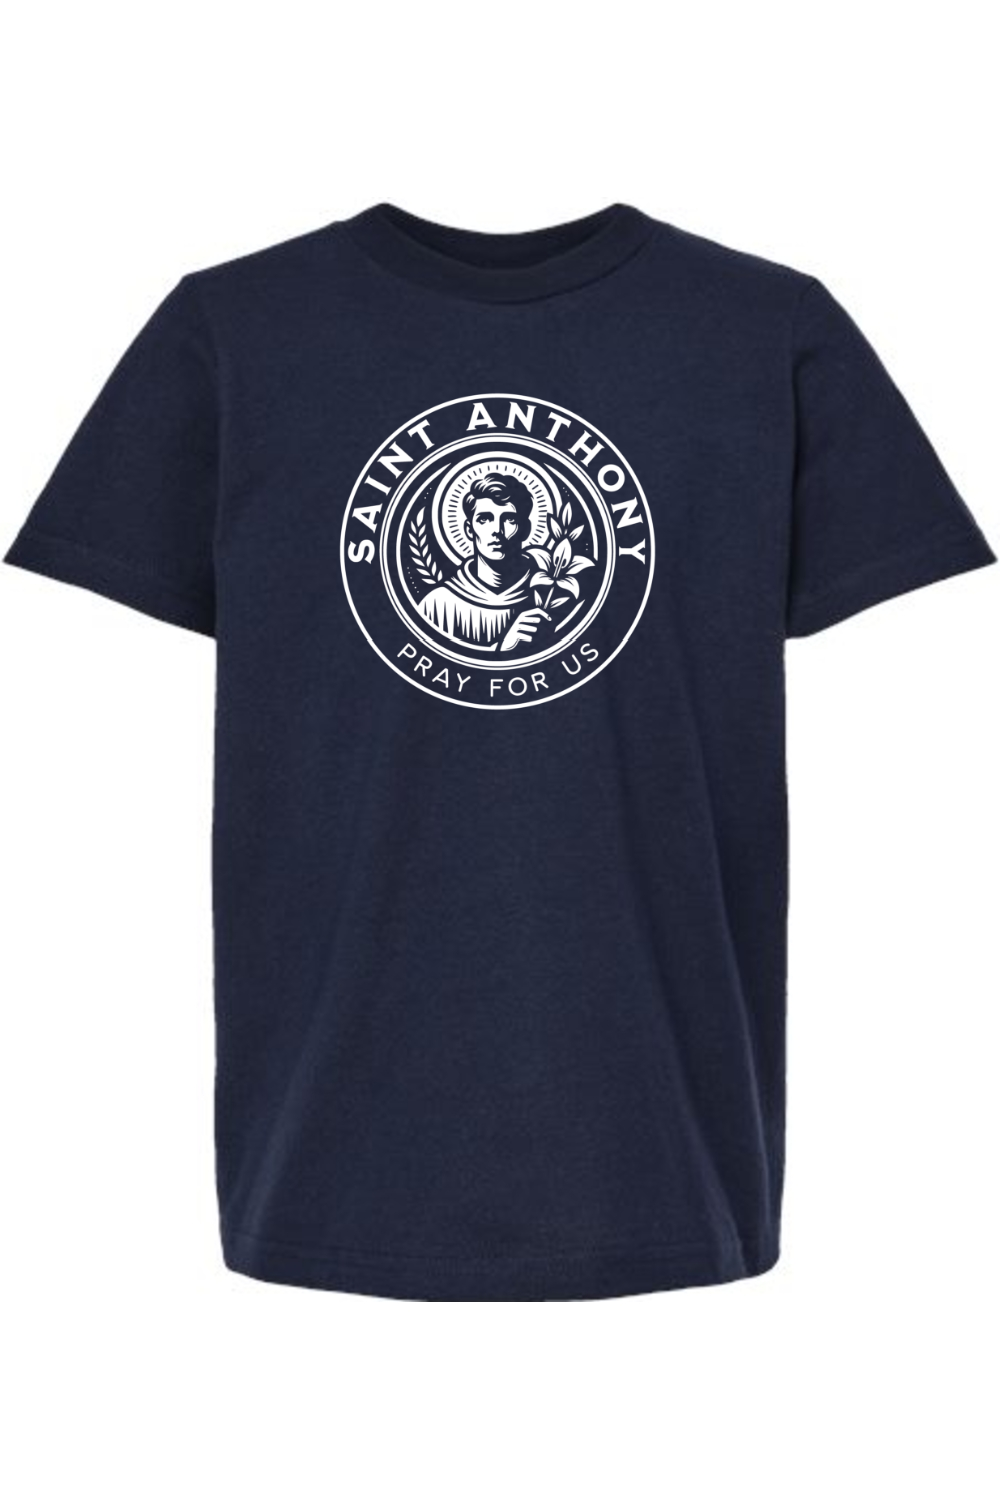 St. Anthony - Pray for Us - Kids Tee